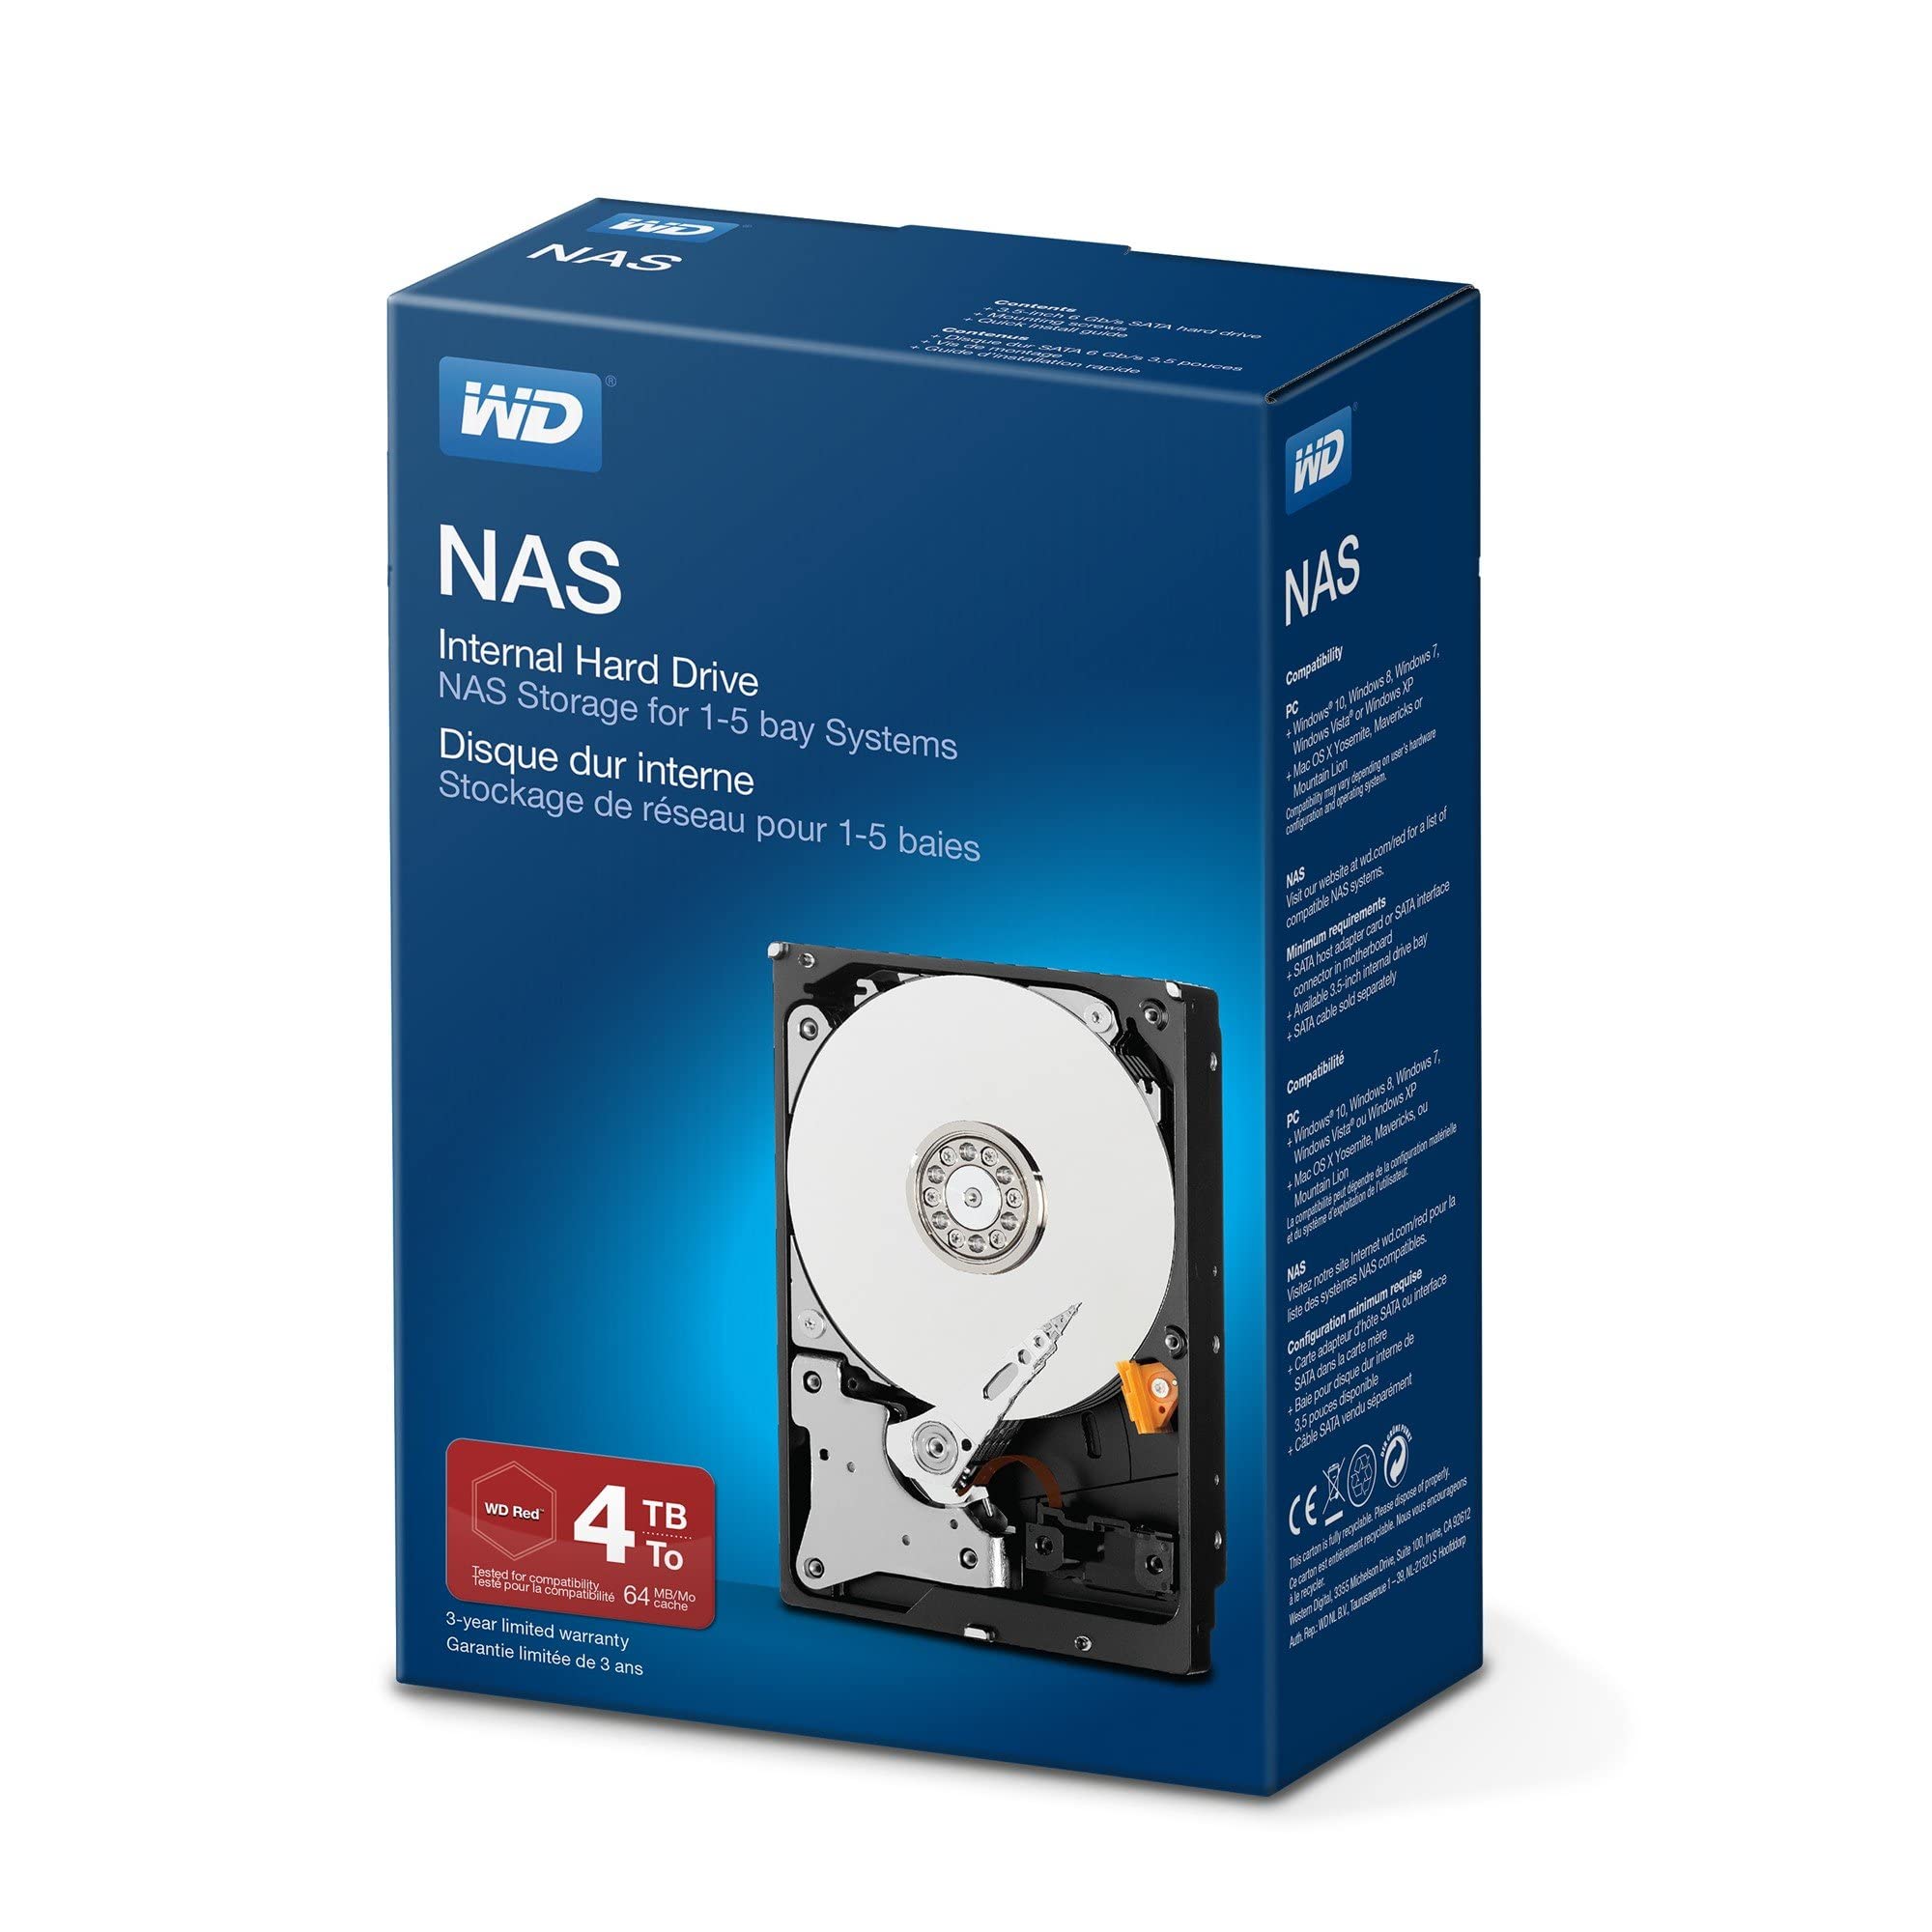 Wd Red Nas 4tb 24x7 Wd Retail Kit Hdd Nas Wdbmma0040hnc Ersn 718037822525